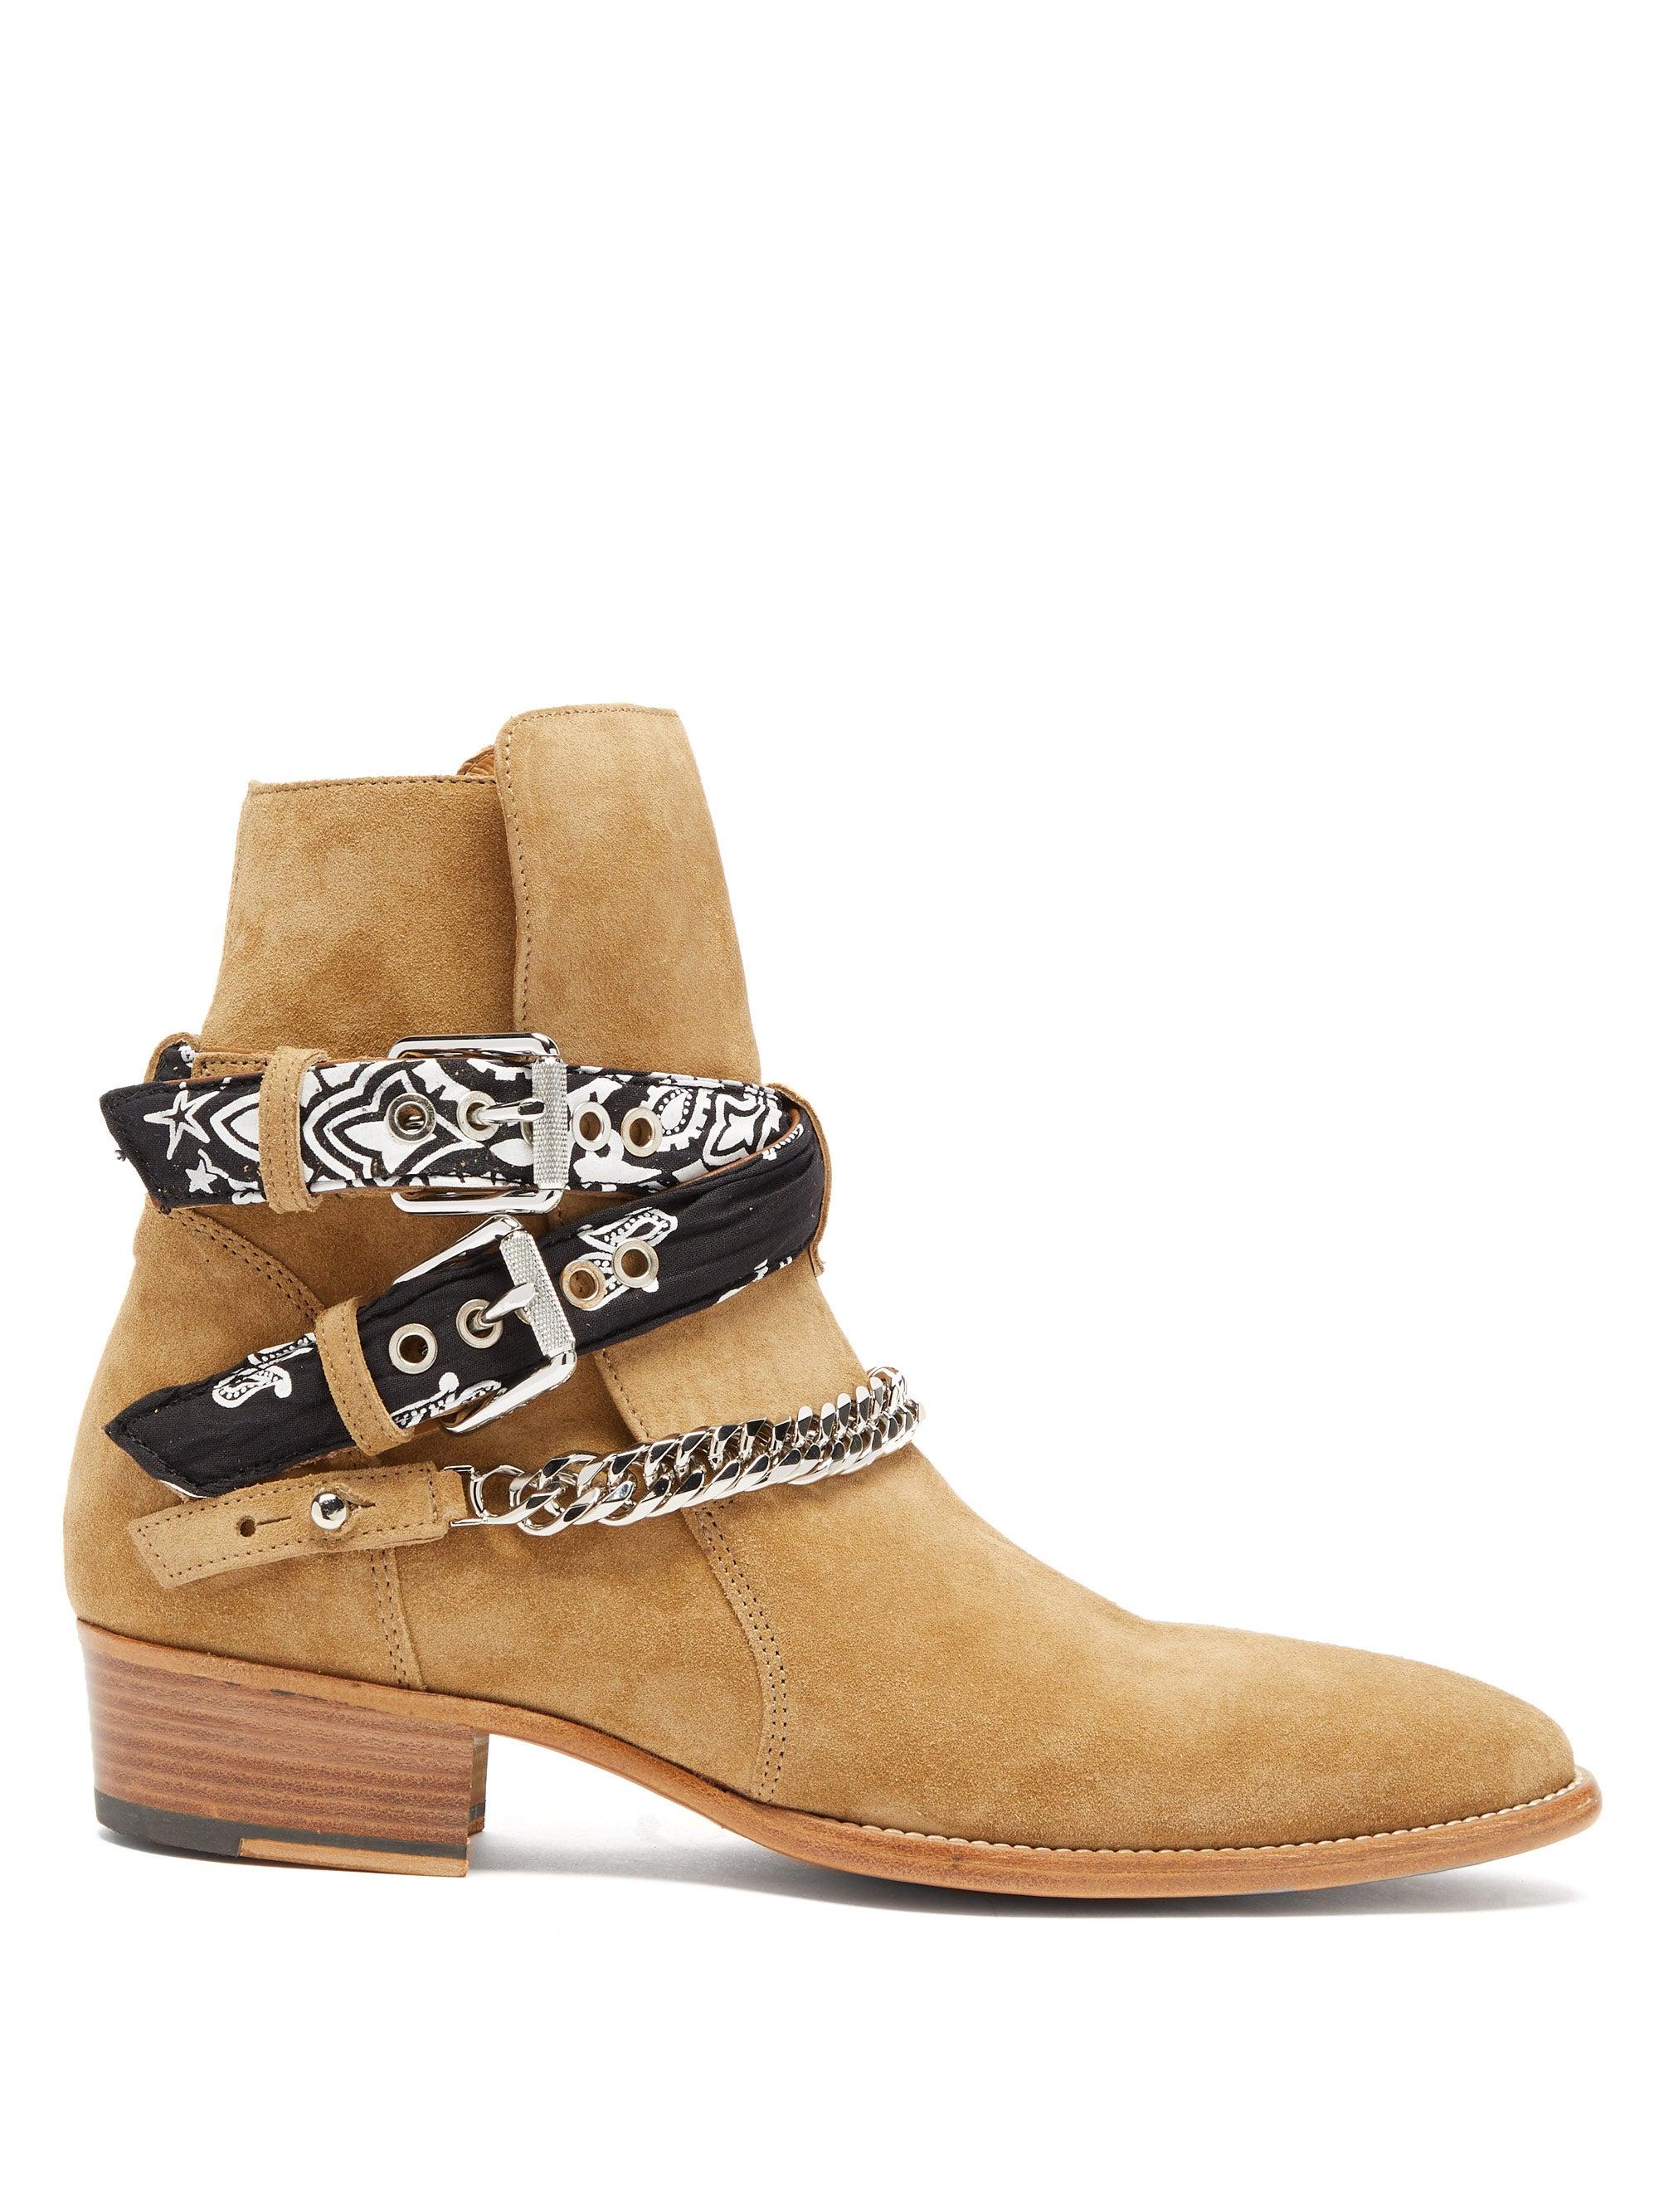 Amiri Bandana-strap Buckled Suede Boots in Beige (Natural) for Men - Lyst